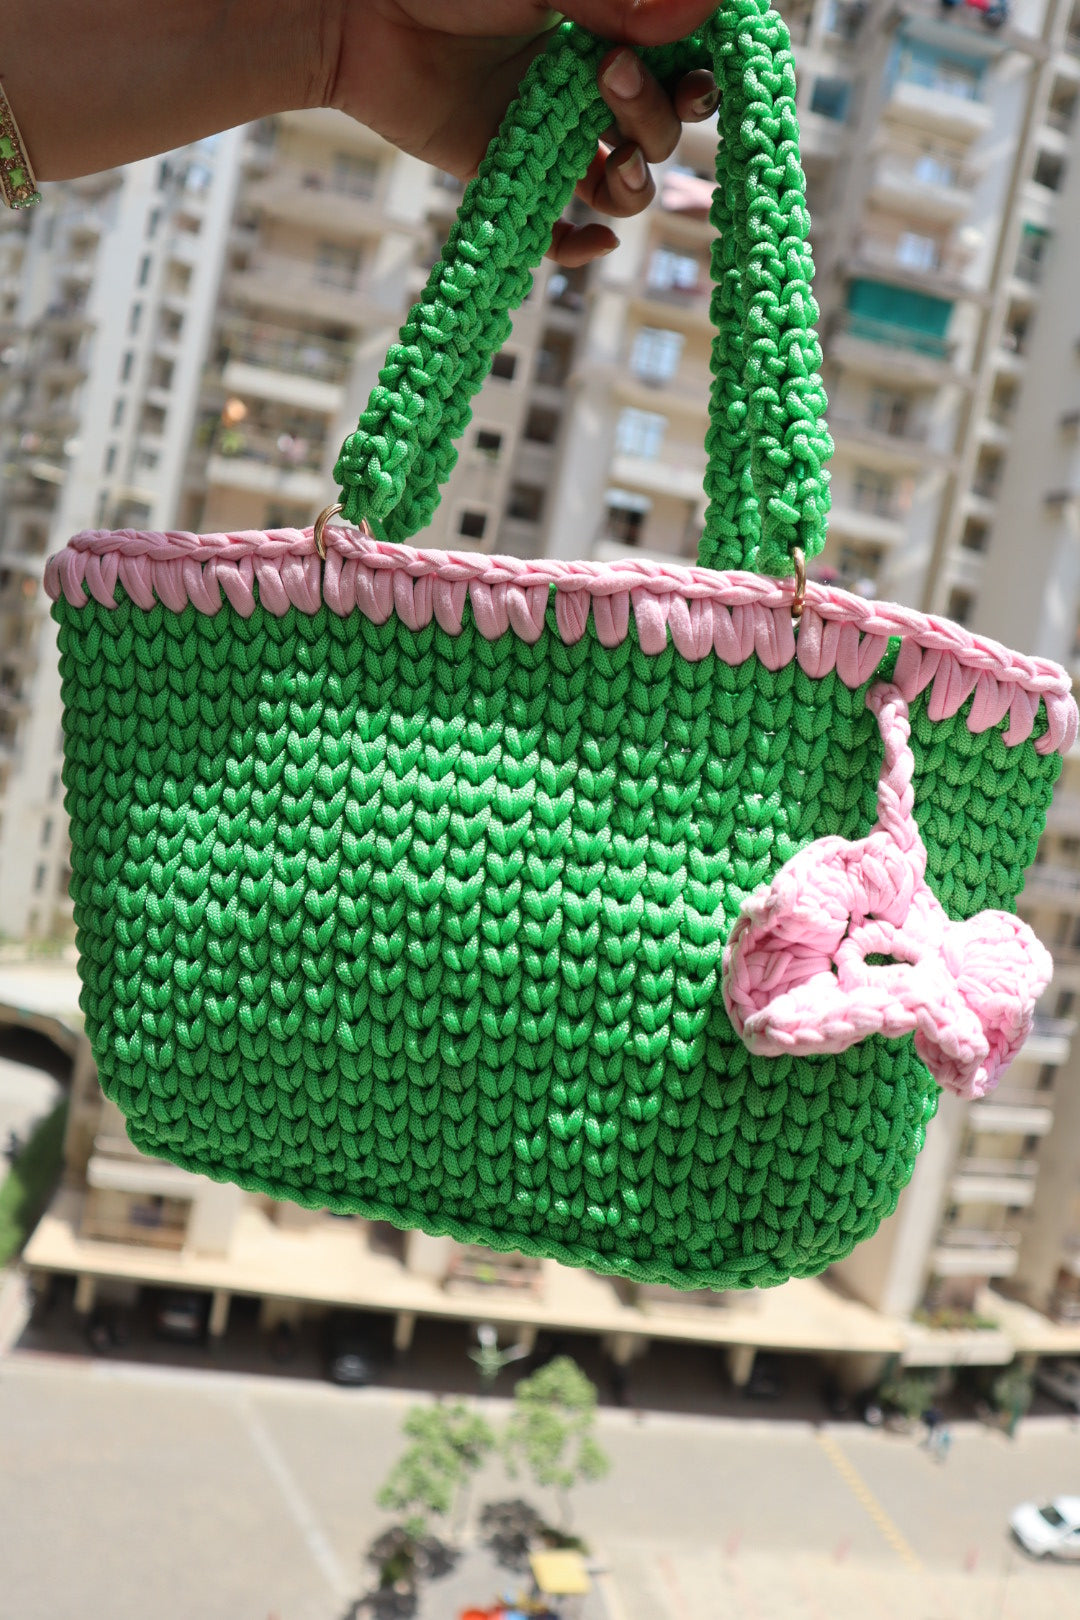 Playful Green and Pink Handcrafted Crochet Bag